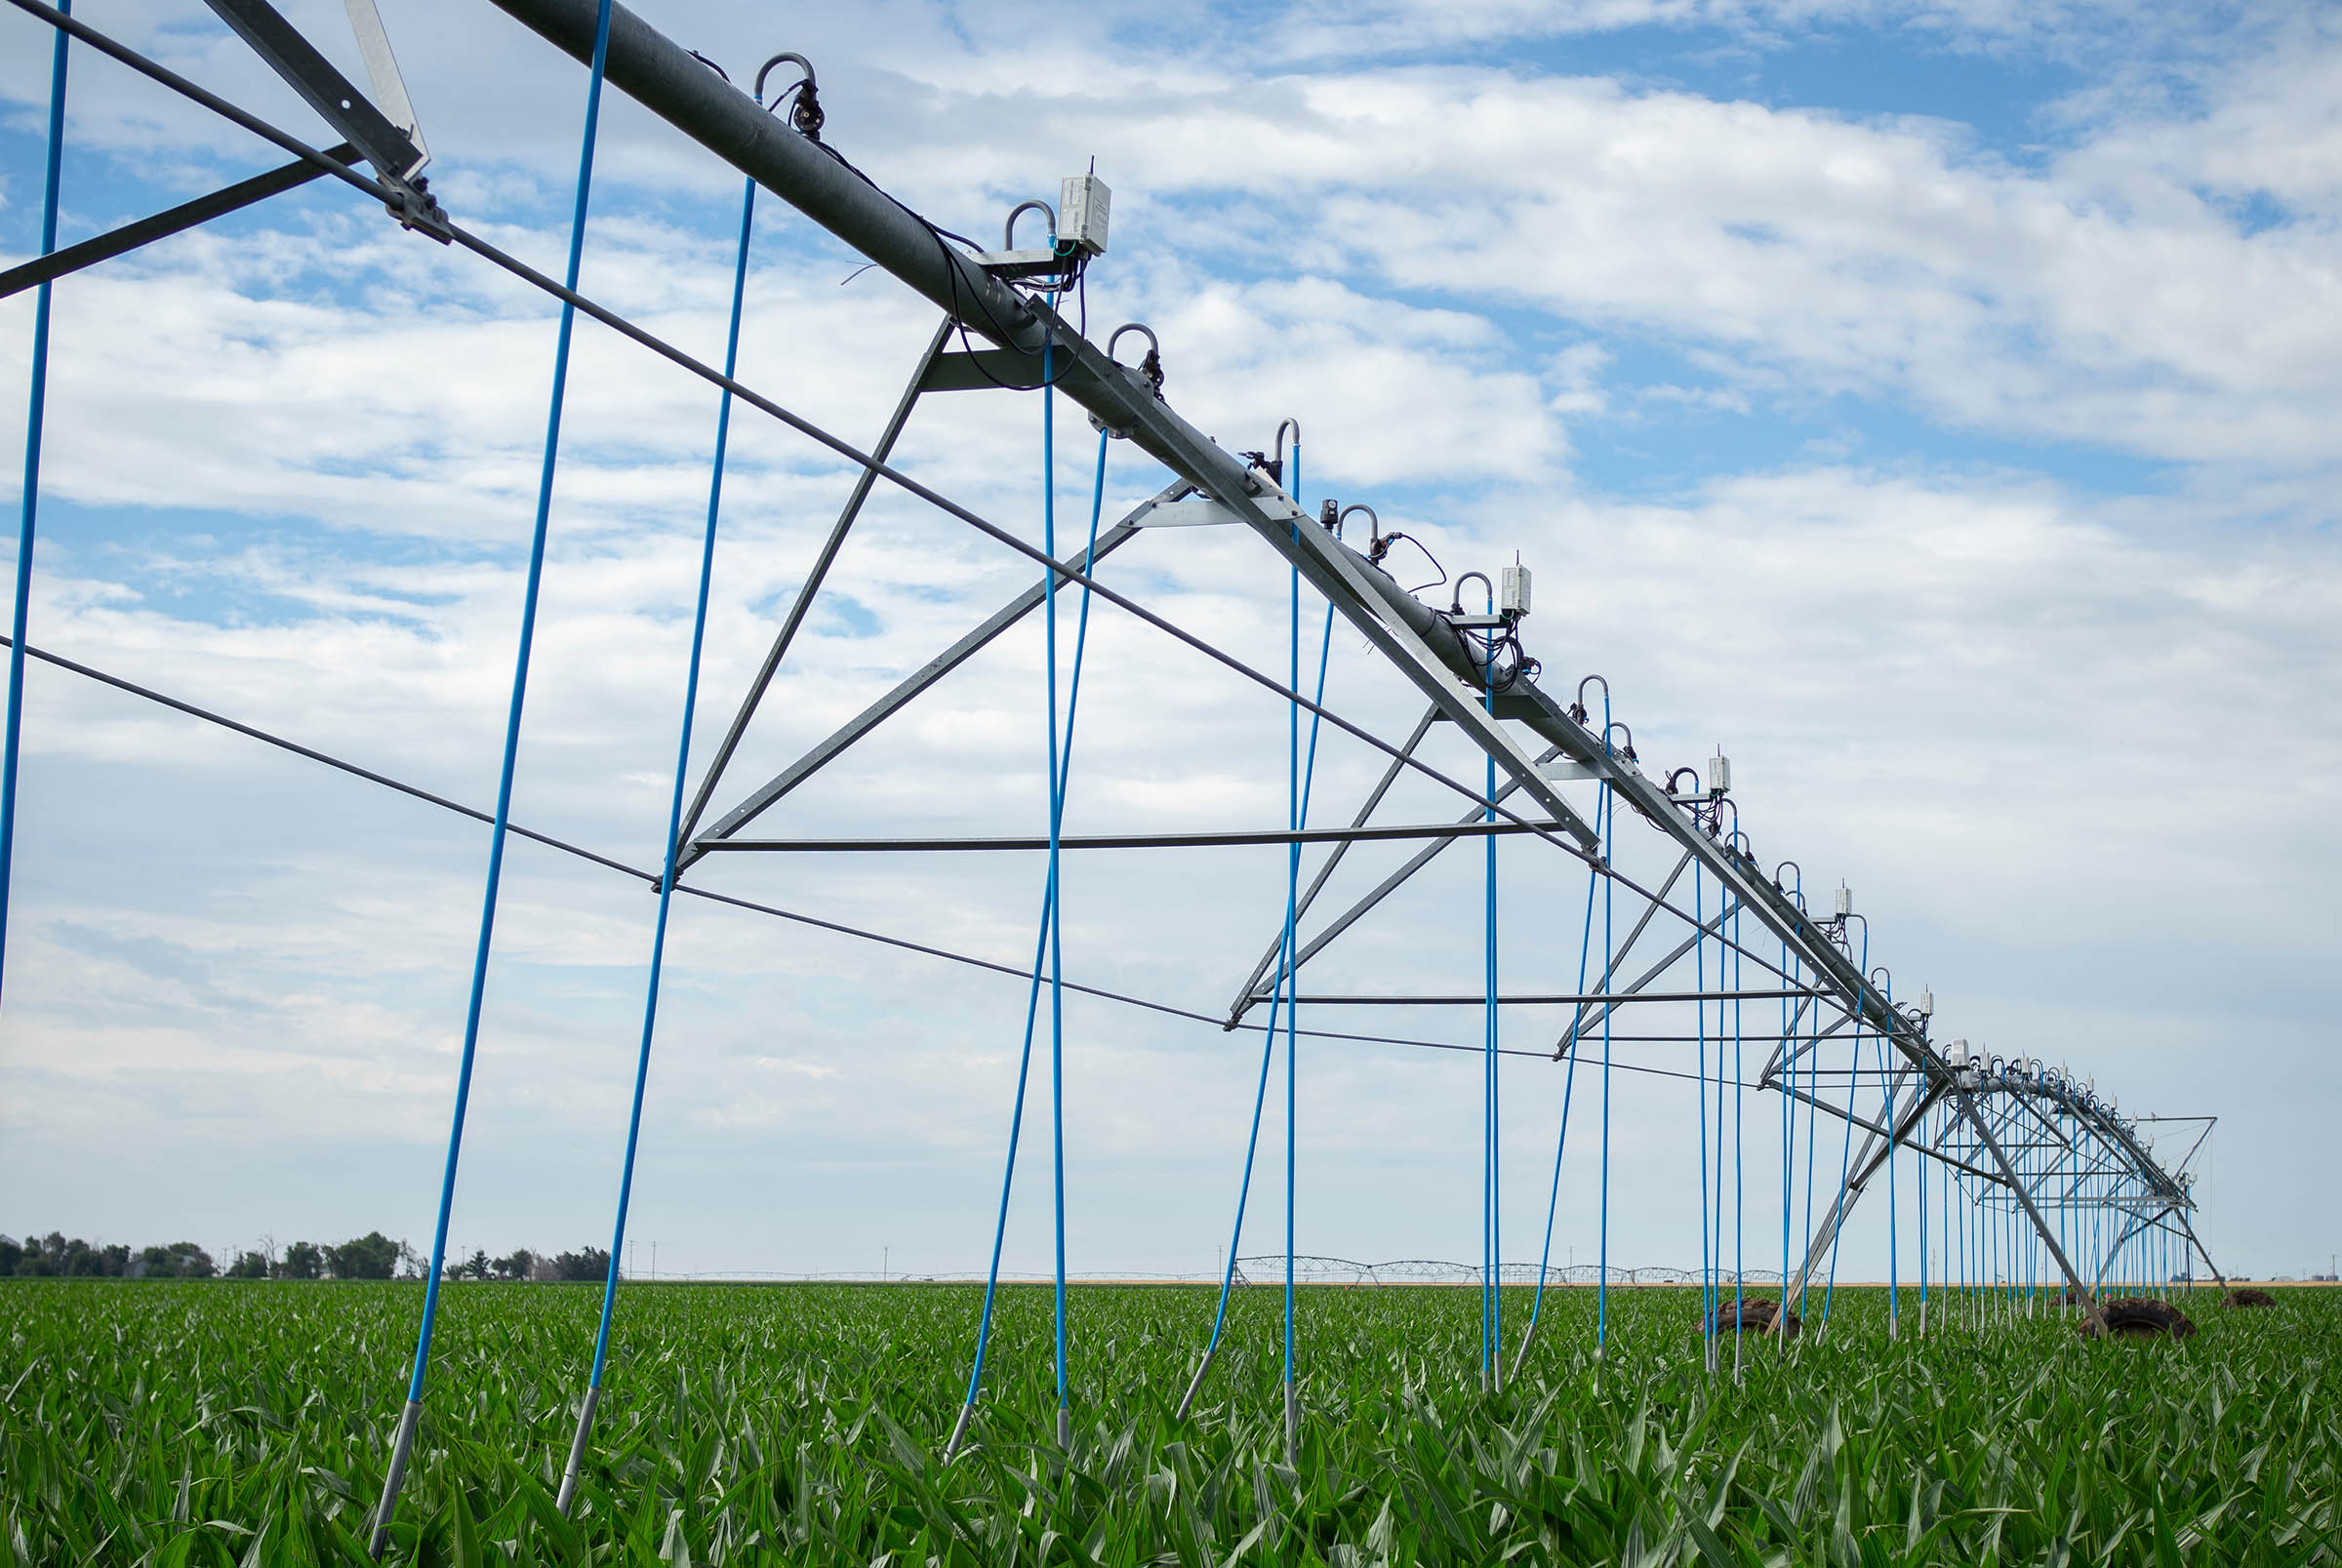 The center pivot irrigation system at the Oklahoma State University McCaull Research and Demonstration Farm will be one of the topics discussed at this year’s Panhandle Crops & Forages Field Day in Eva. The Aug. 31 event kicks off the fall field day events with topics like sorghum varieties, nitrogen management, soil moisture monitoring and managing spider mites in corn. (Photo by Todd Johnson, OSU Agriculture.)